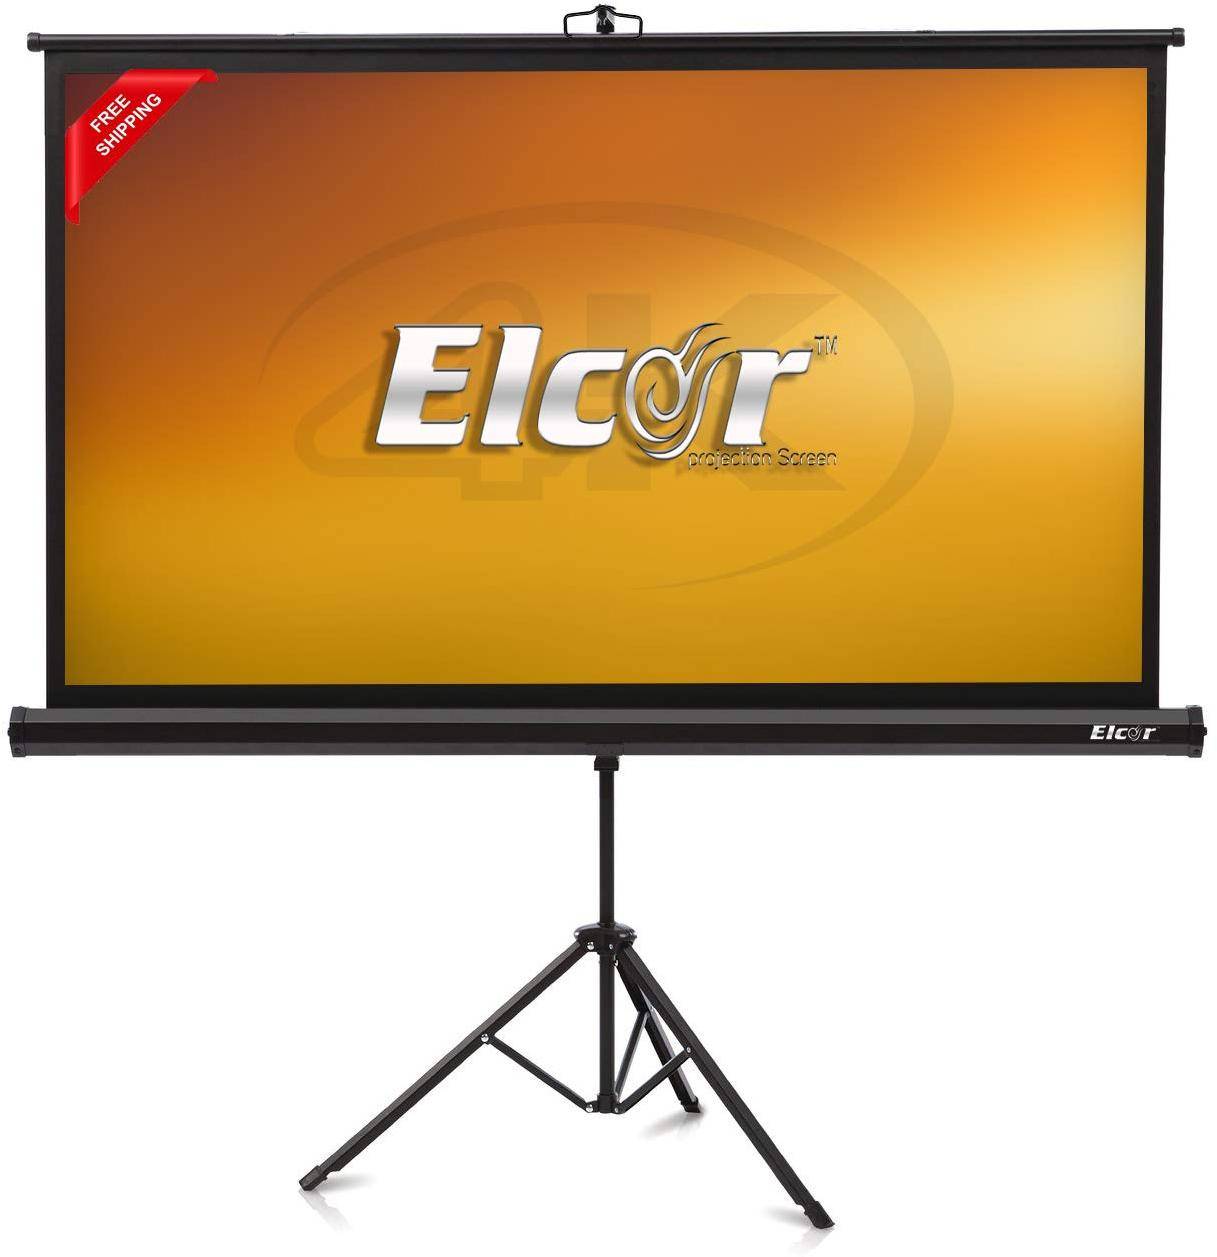 Elcor 4ft by 6ft 84 inch Tripod Projector Screens zoom image